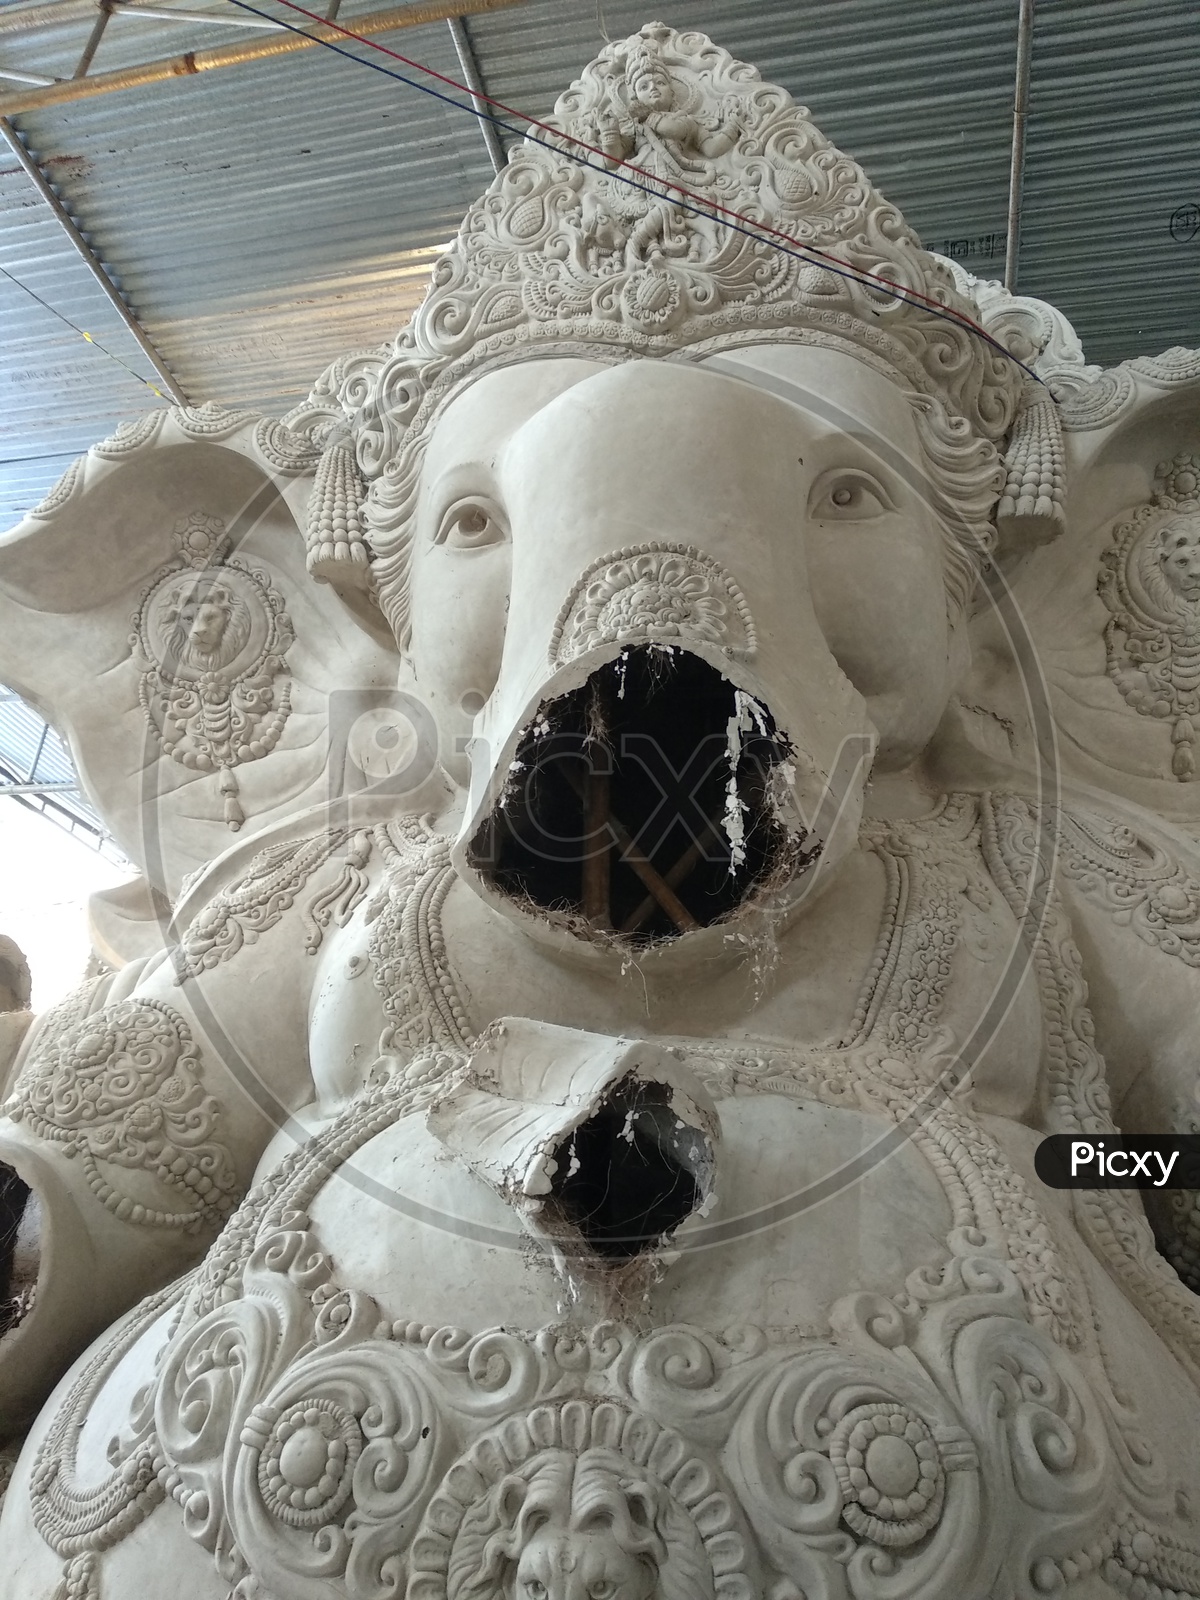 Prepartion of Ganesh Idol for Ganesh Chathurthi. Idol out from Mould and ready to get attached with hands